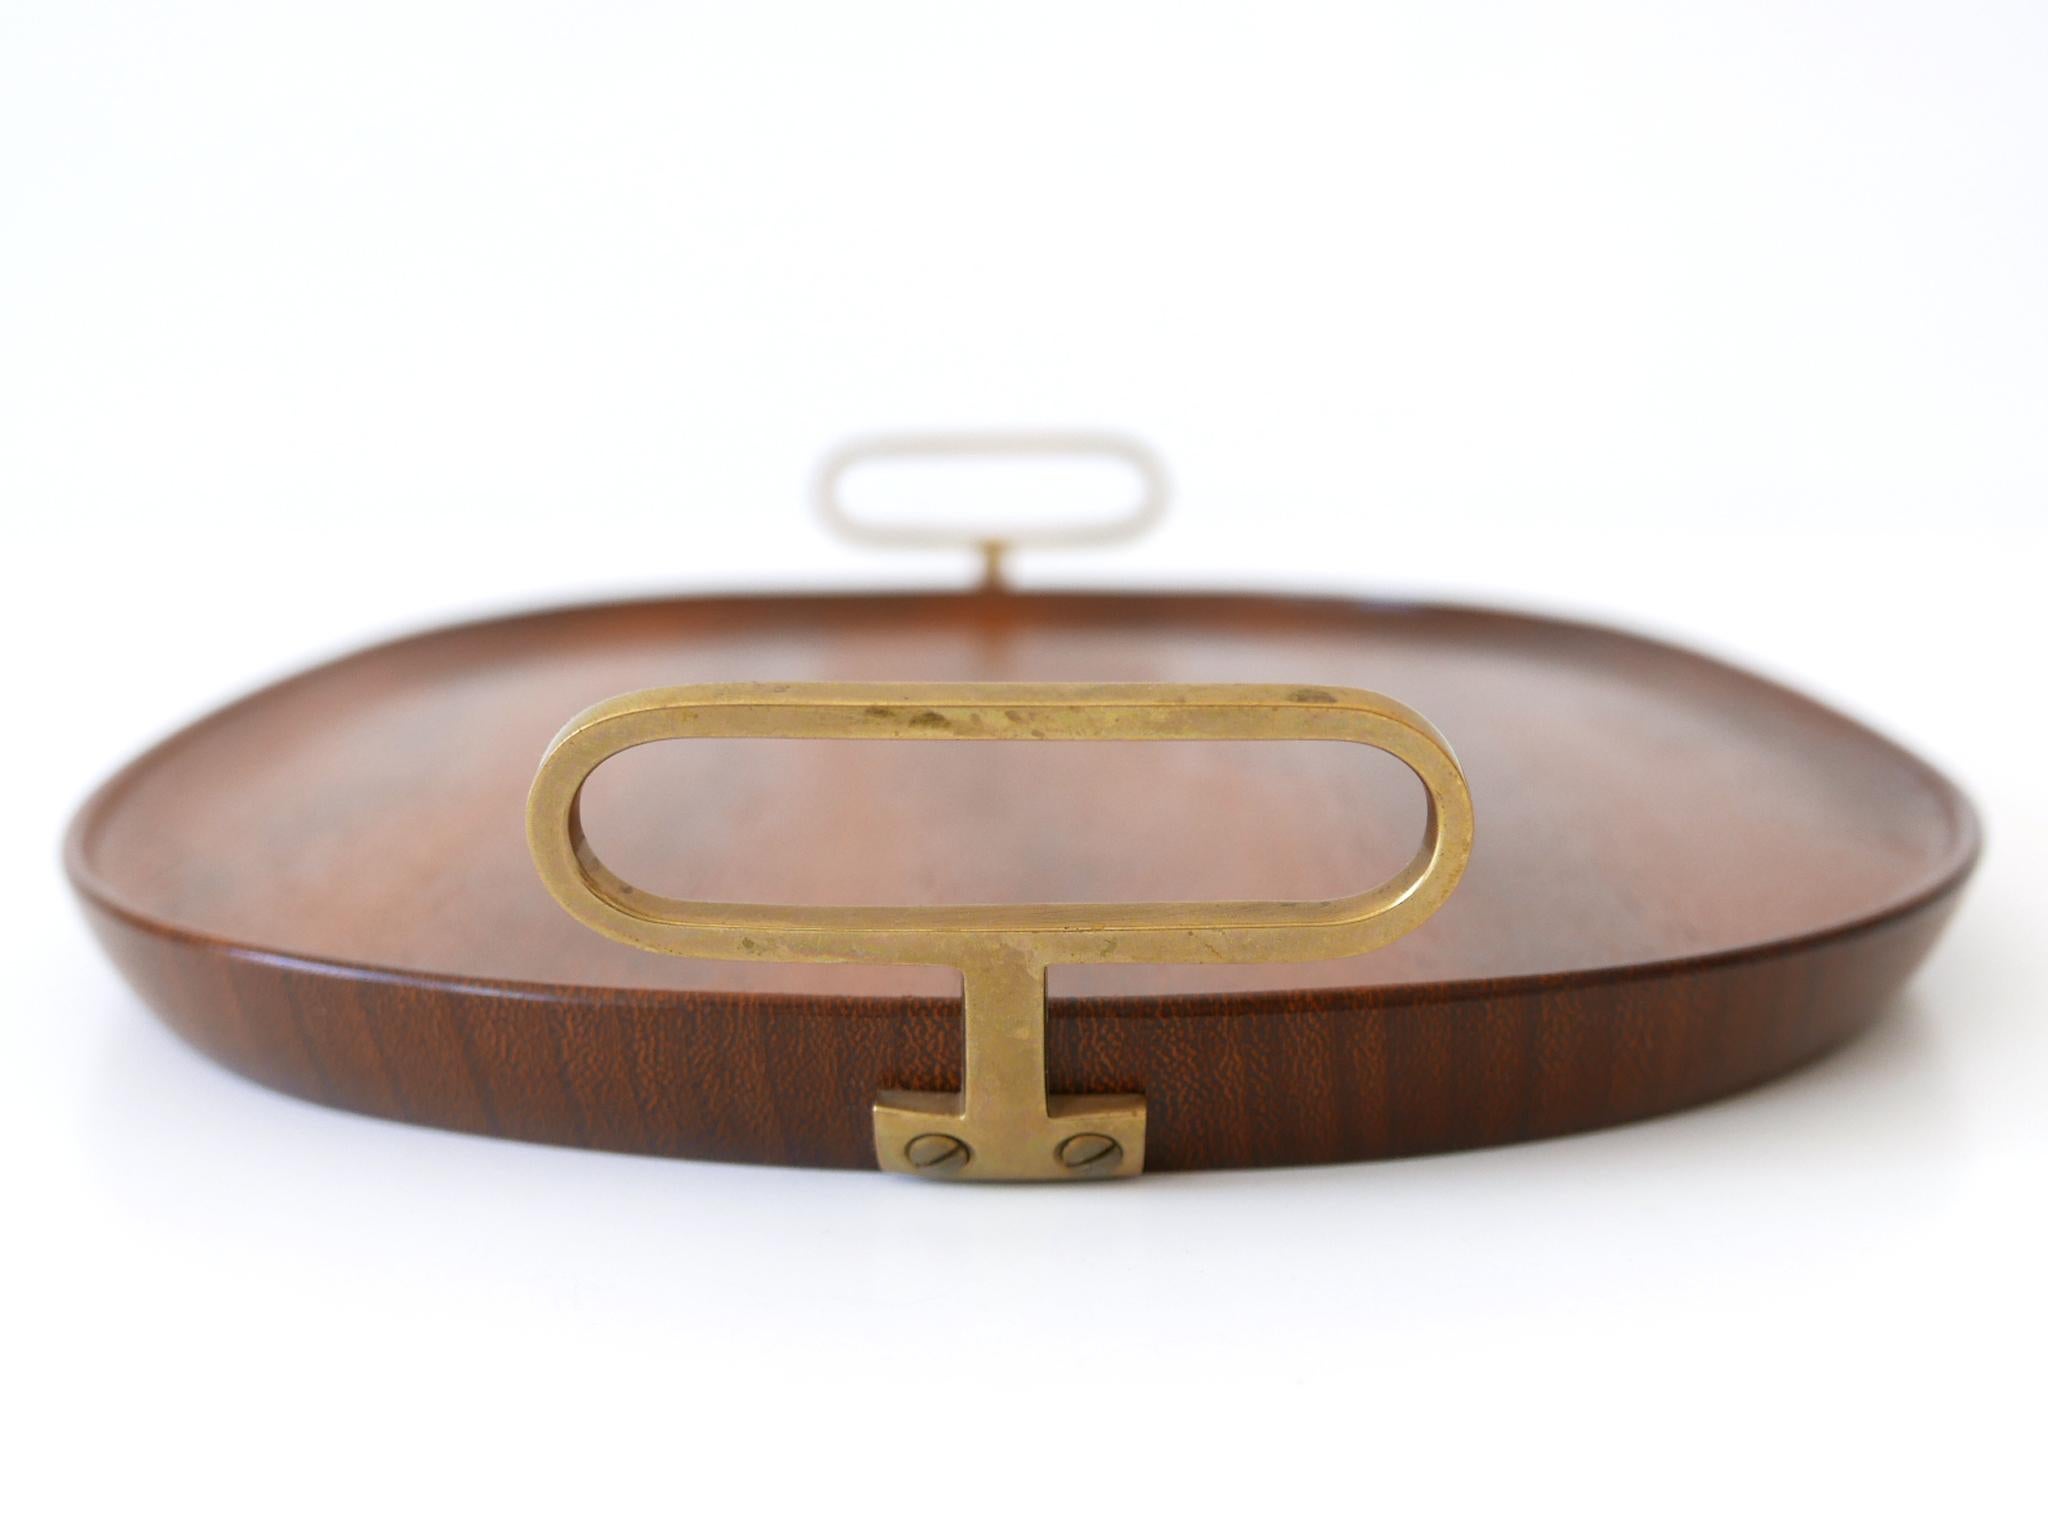 Extremely Rare Mid-Century Modern Teak Serving Tray by Carl Auböck Austria 1950s For Sale 6